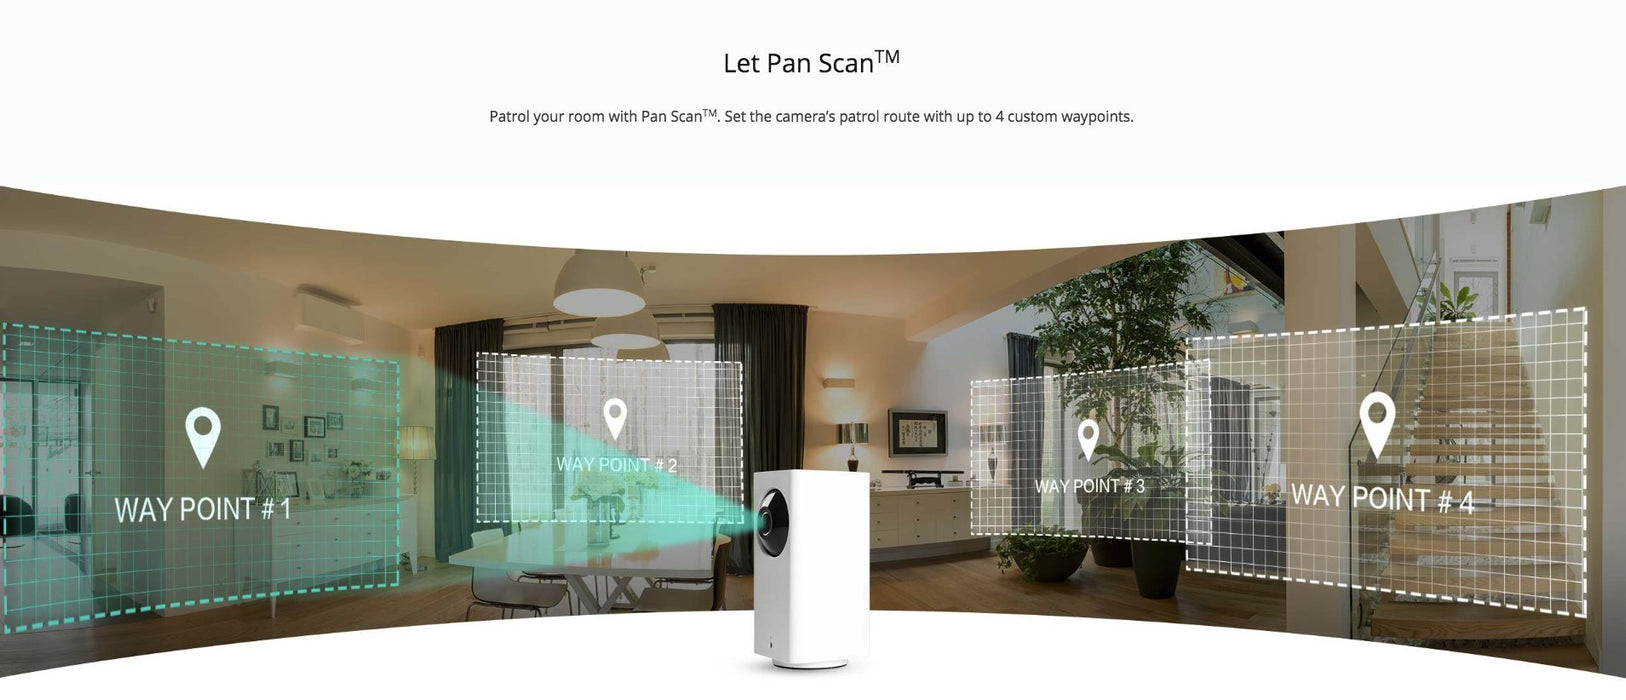 Wyze Cam Pan 1080p Pan/Tilt/Zoom Wi-Fi Indoor Smart Home Camera with Night Vision and 2-Way Audio, Compatible with Alexa